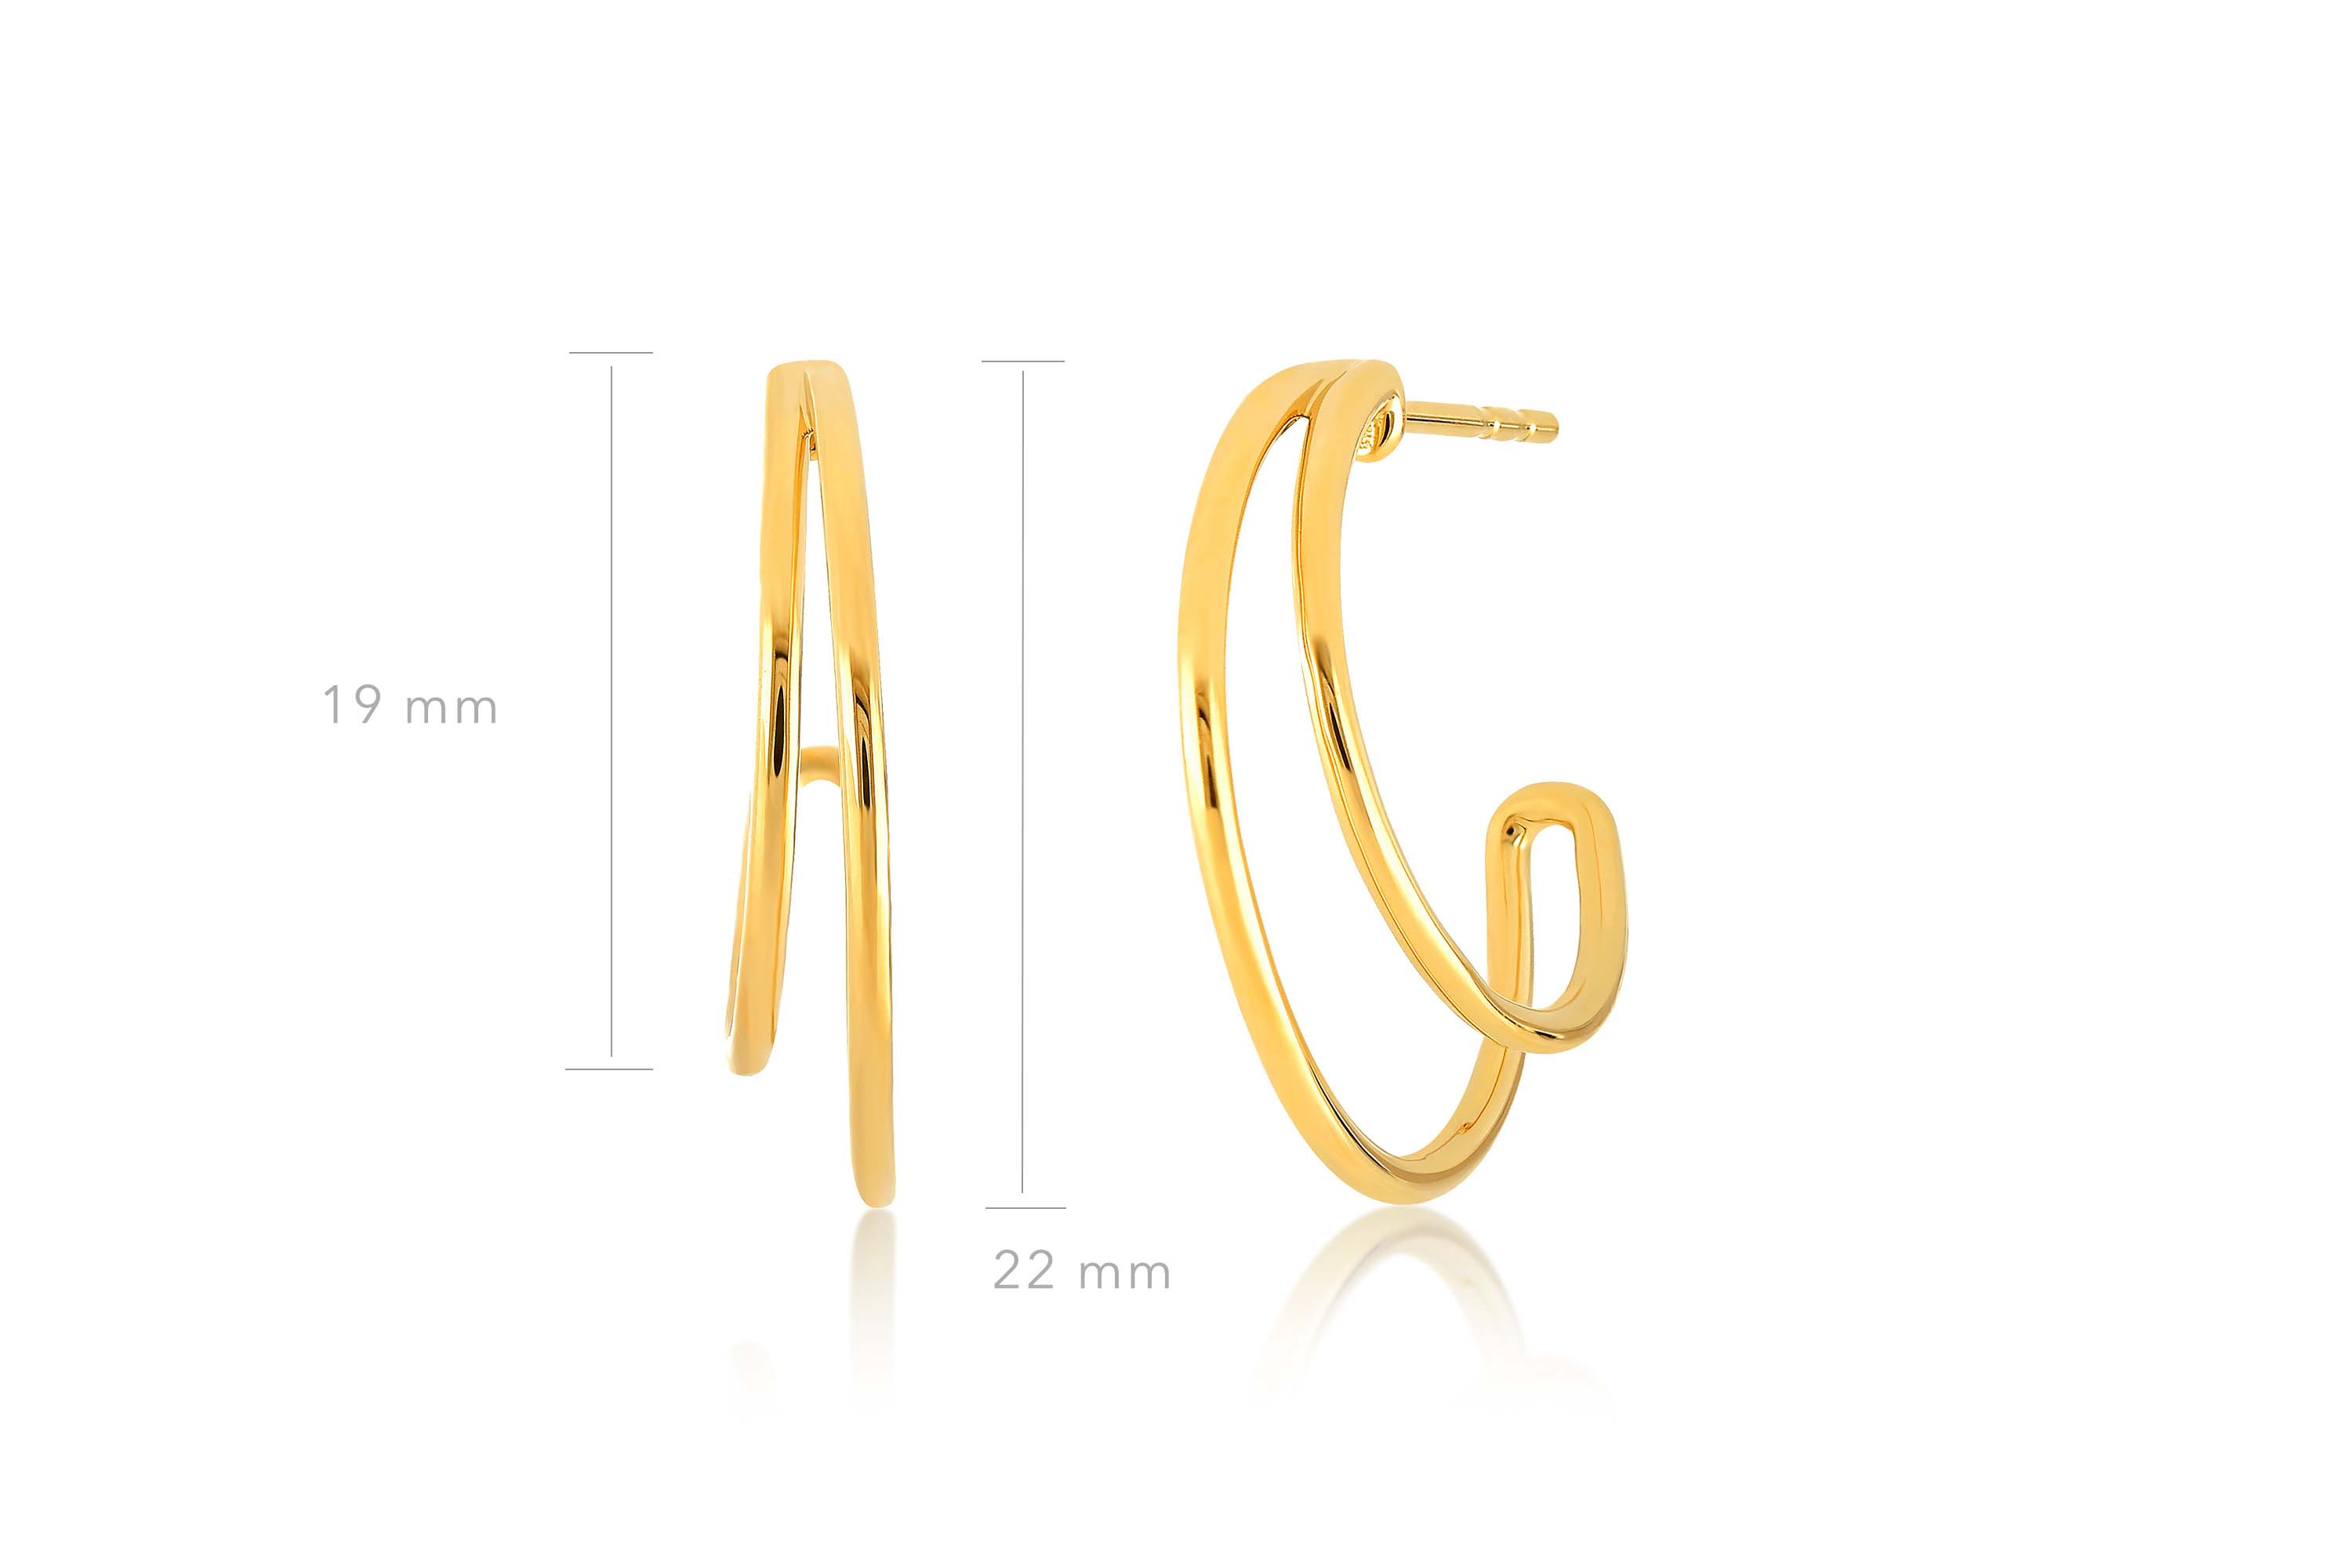 Gold Double Hoop Earring in 14k yellow gold with size measurements